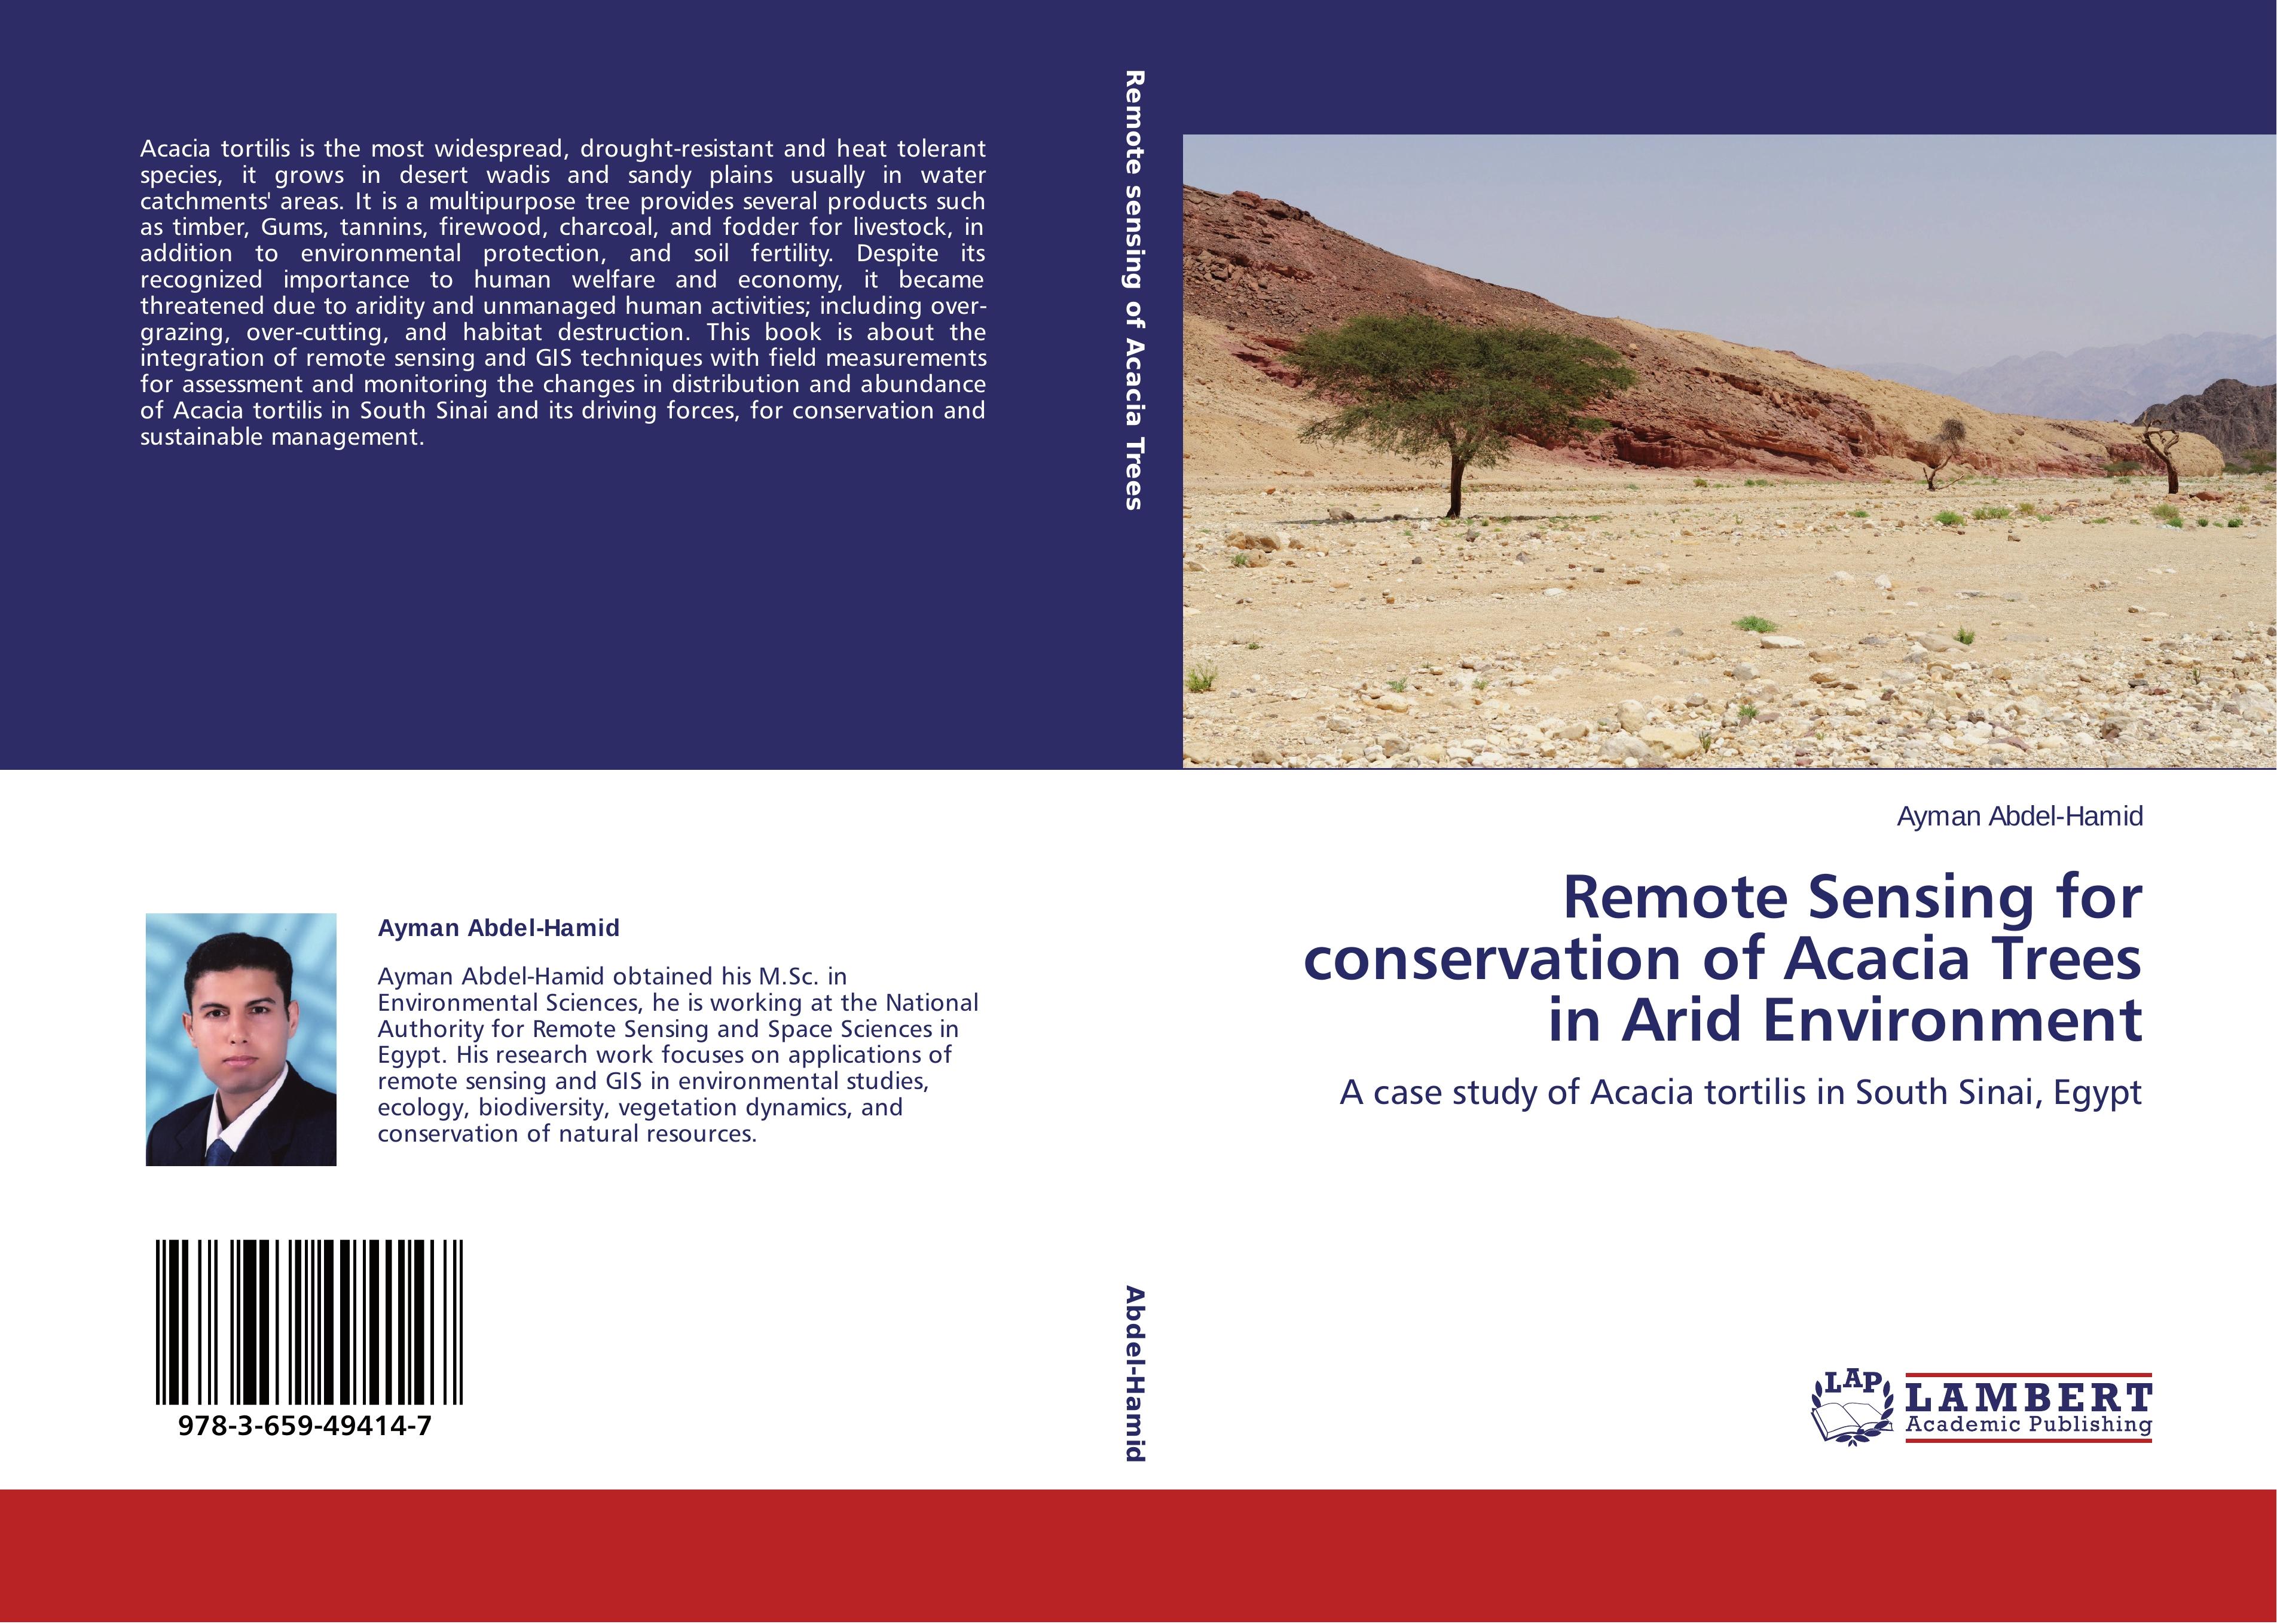 Remote Sensing for conservation of Acacia Trees in Arid Environment | A case study of Acacia tortilis in South Sinai, Egypt | Ayman Abdel-Hamid | Taschenbuch | Paperback | 208 S. | Englisch | 2014 - Abdel-Hamid, Ayman